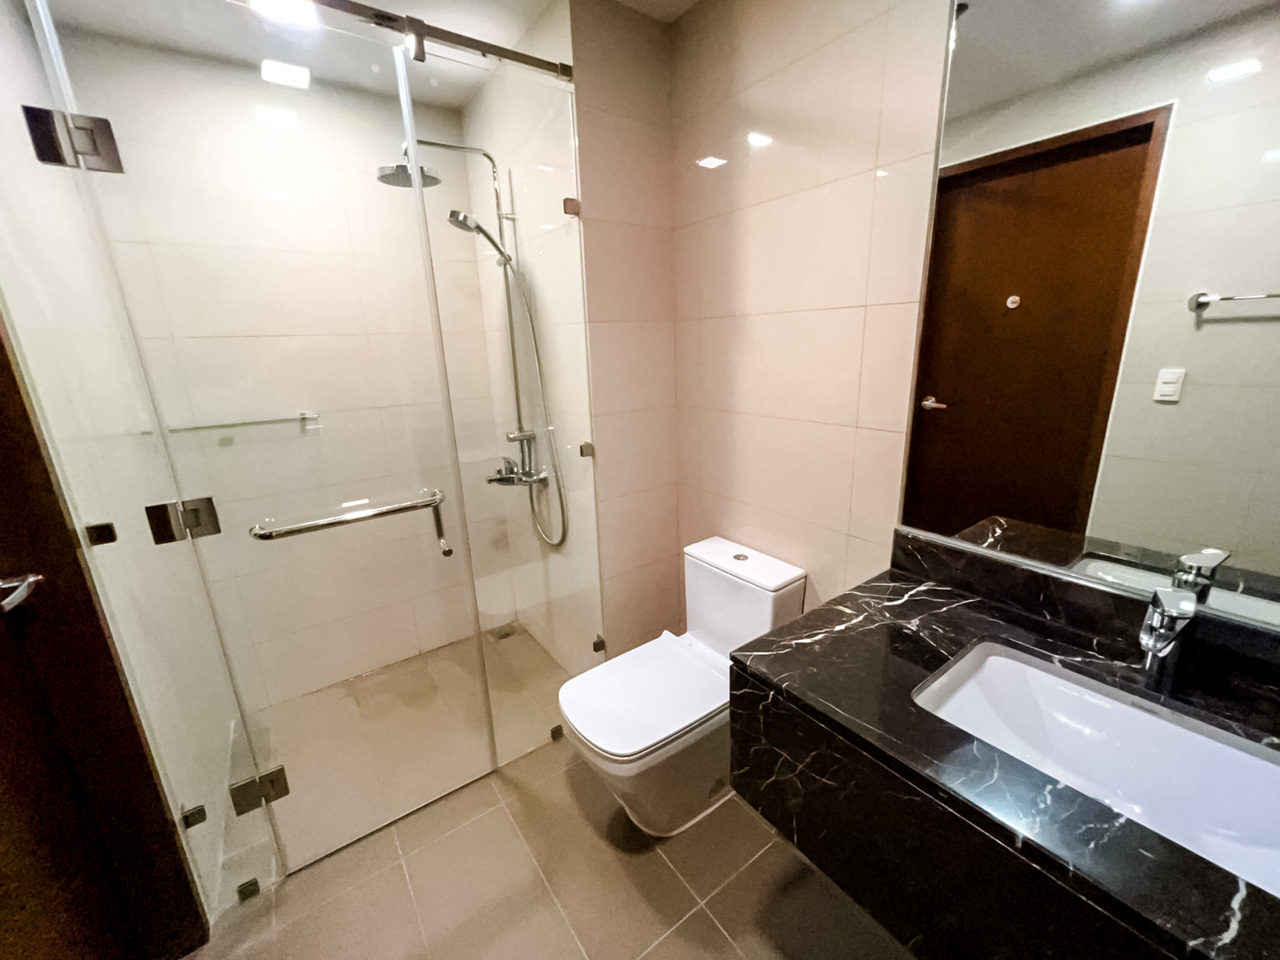 RCALC15 Unfurnished 1 Bedroom Condo for Rent in Cebu Business Park - 7